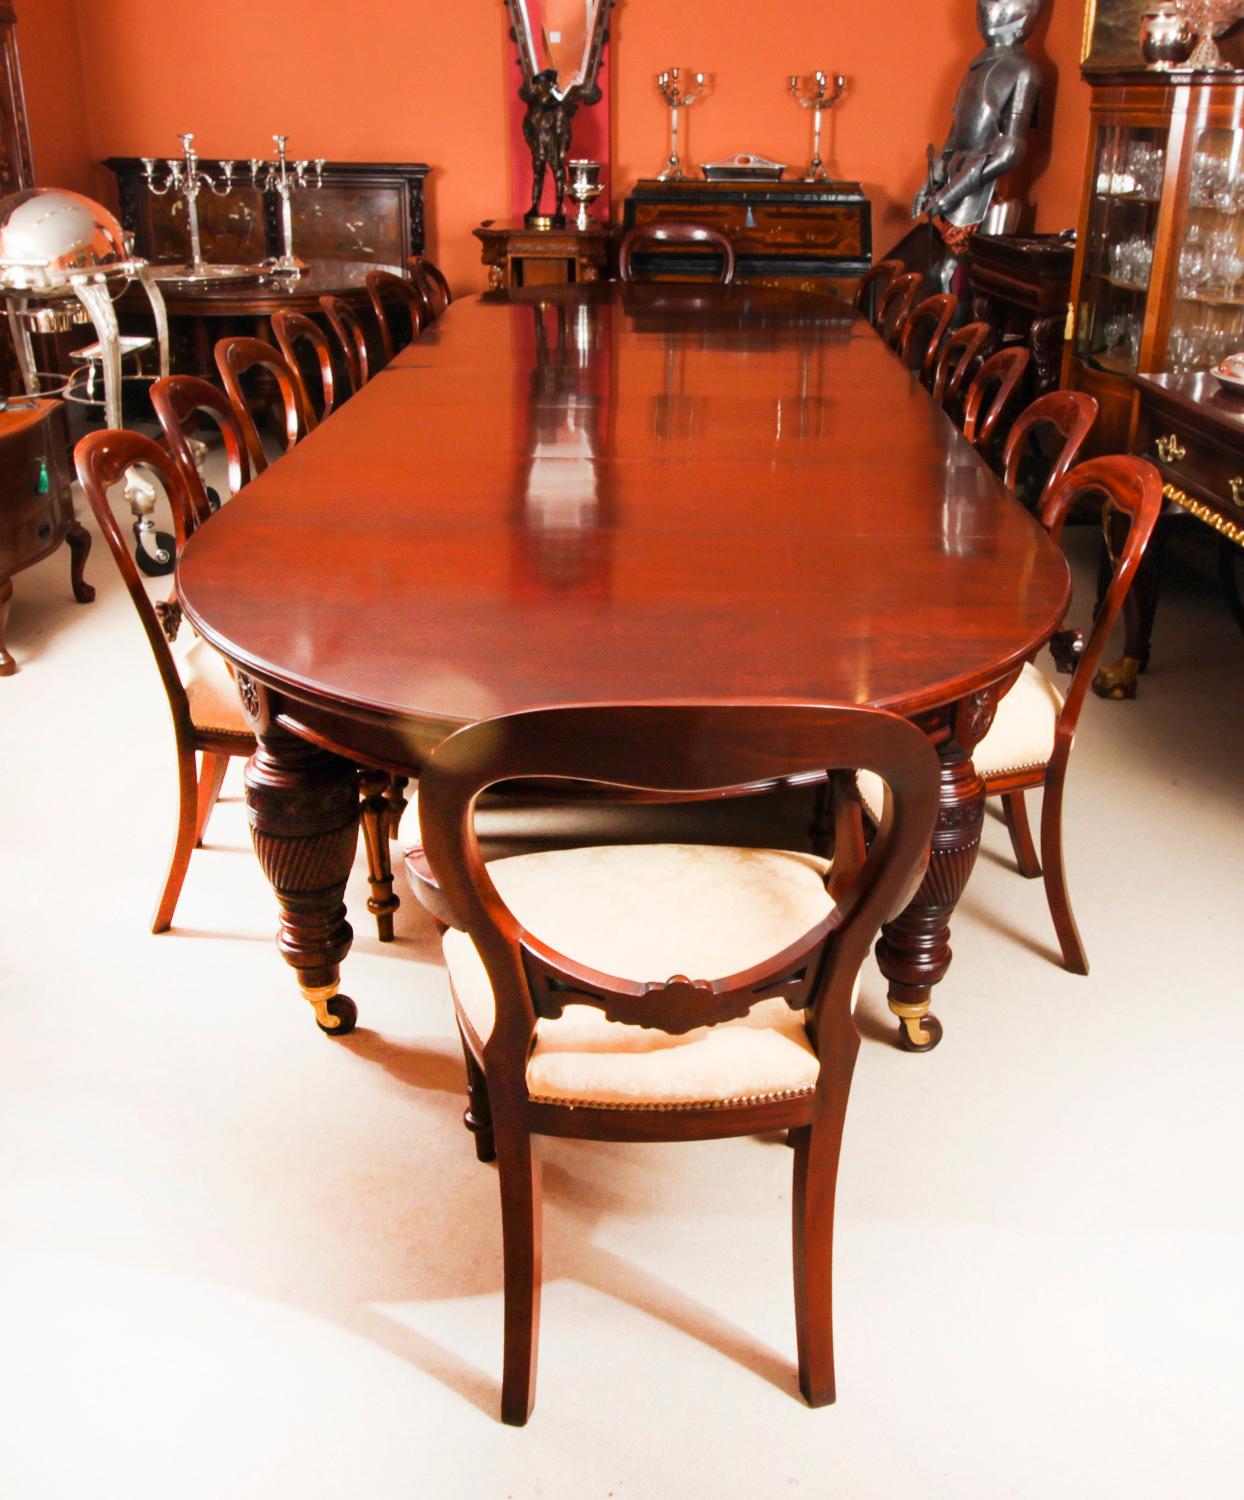 This is a beautiful dining set comprising an antique Victorian flame mahogany dining table, Circa 1880 in date, and a beautiful set of sixteen balloon back dining chairs.

This is a beautiful antique late Victorian flame mahogany extending dining